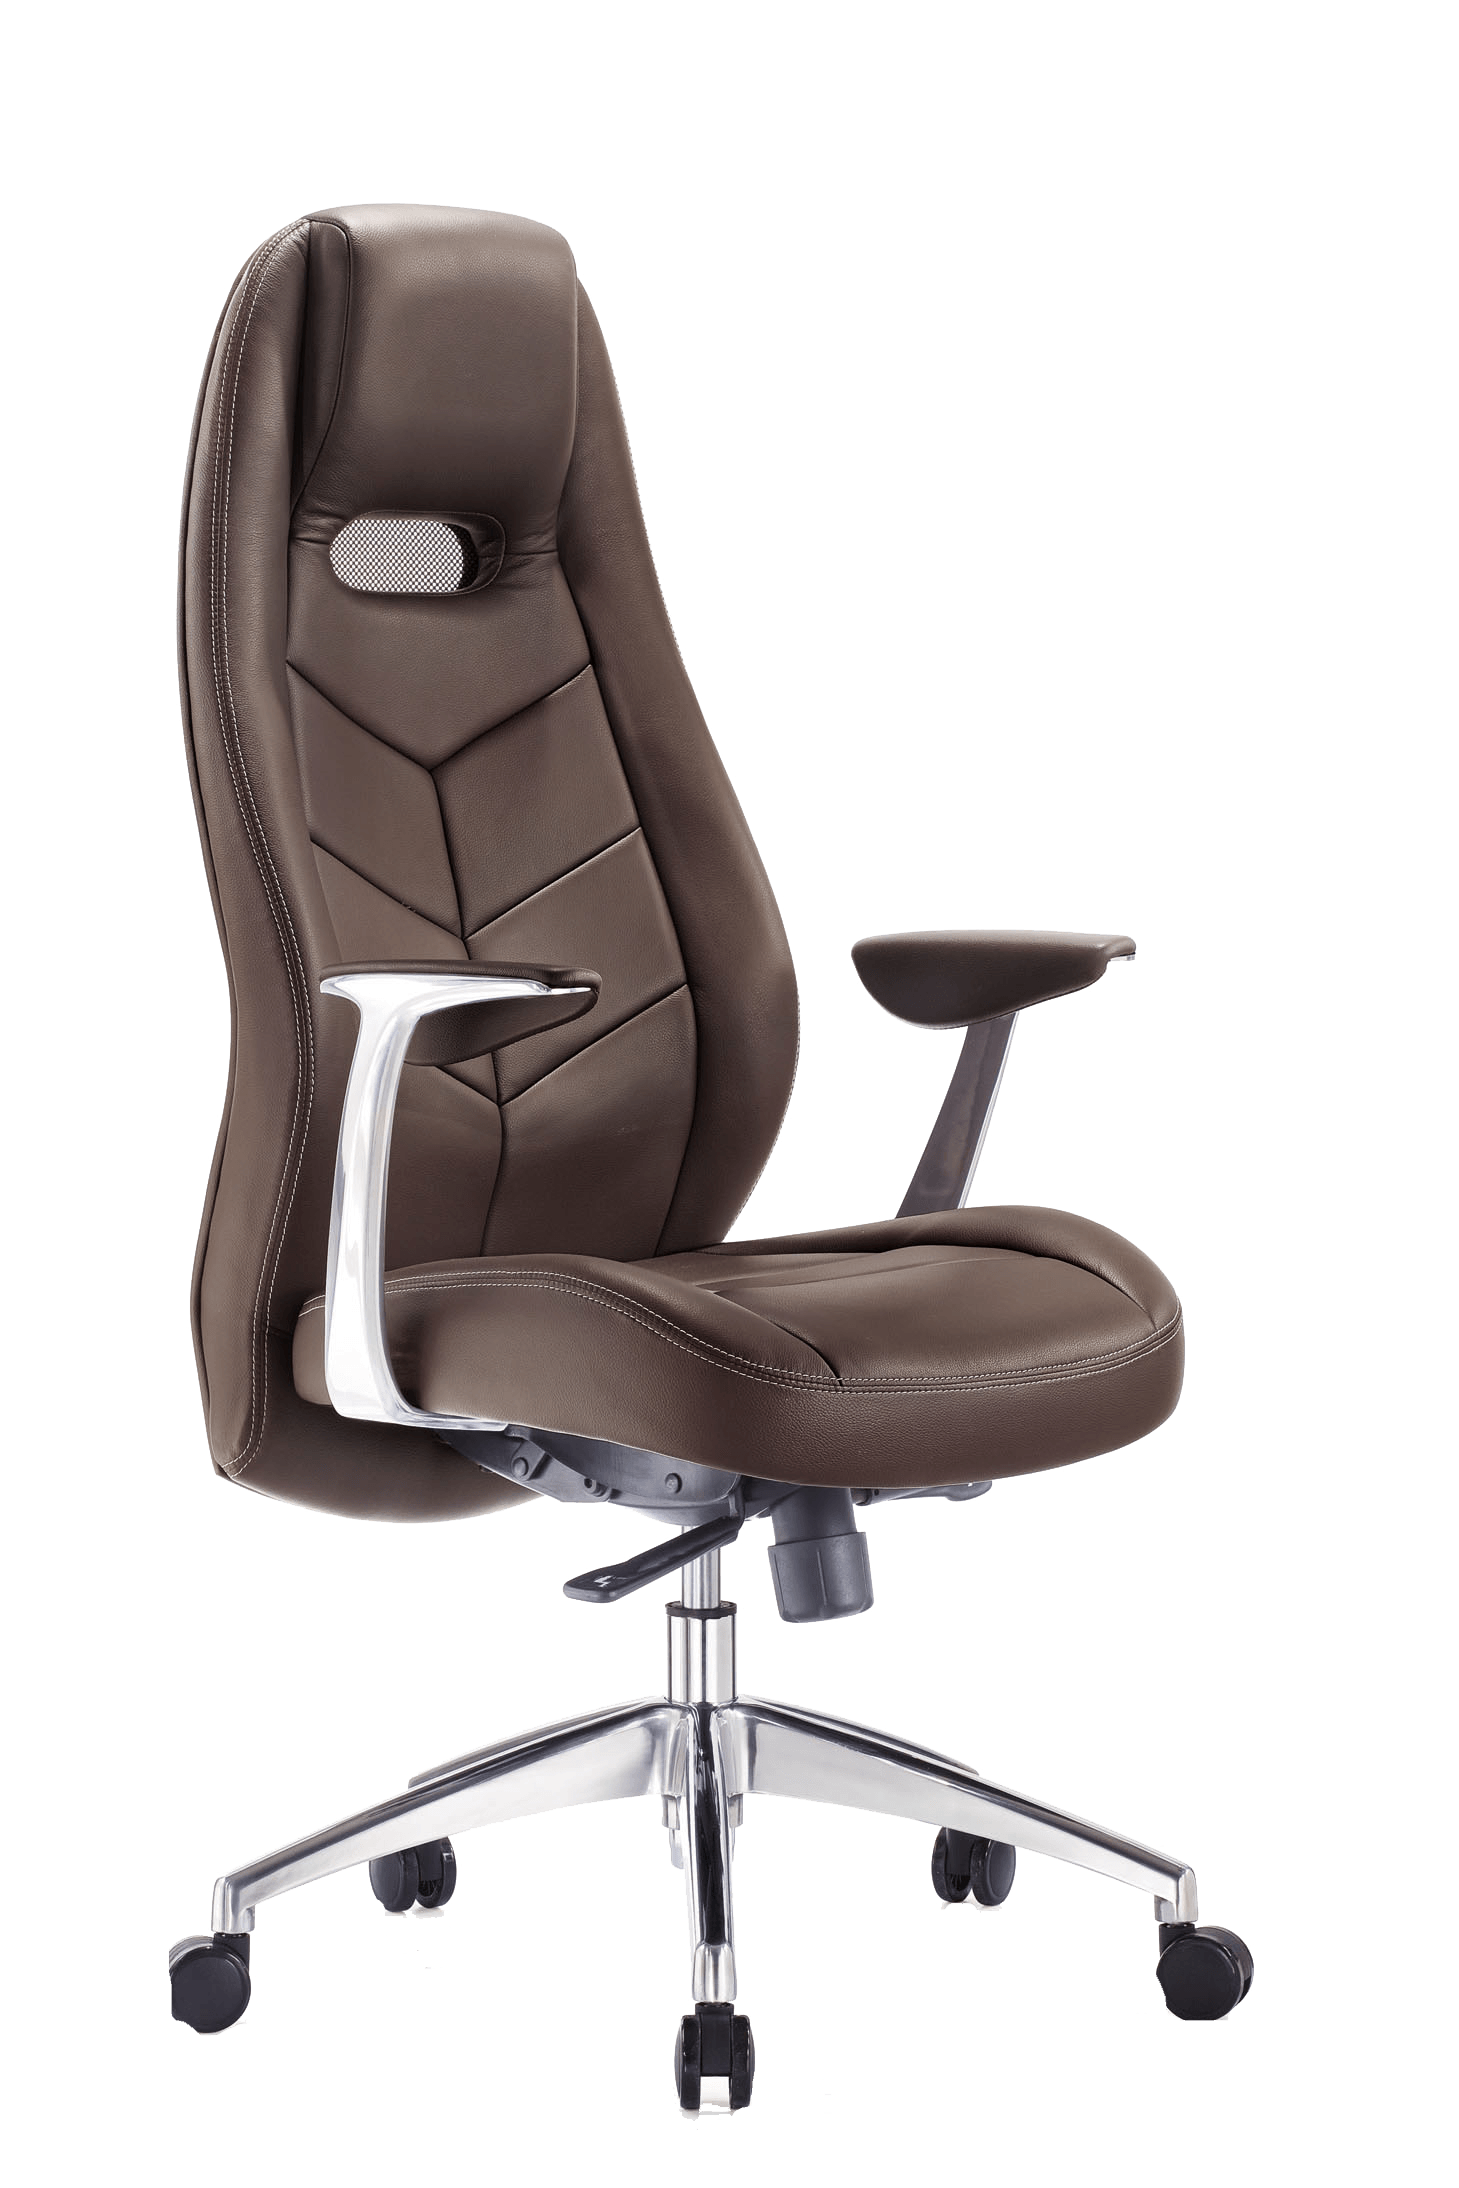 Office Chair PNG Free Image